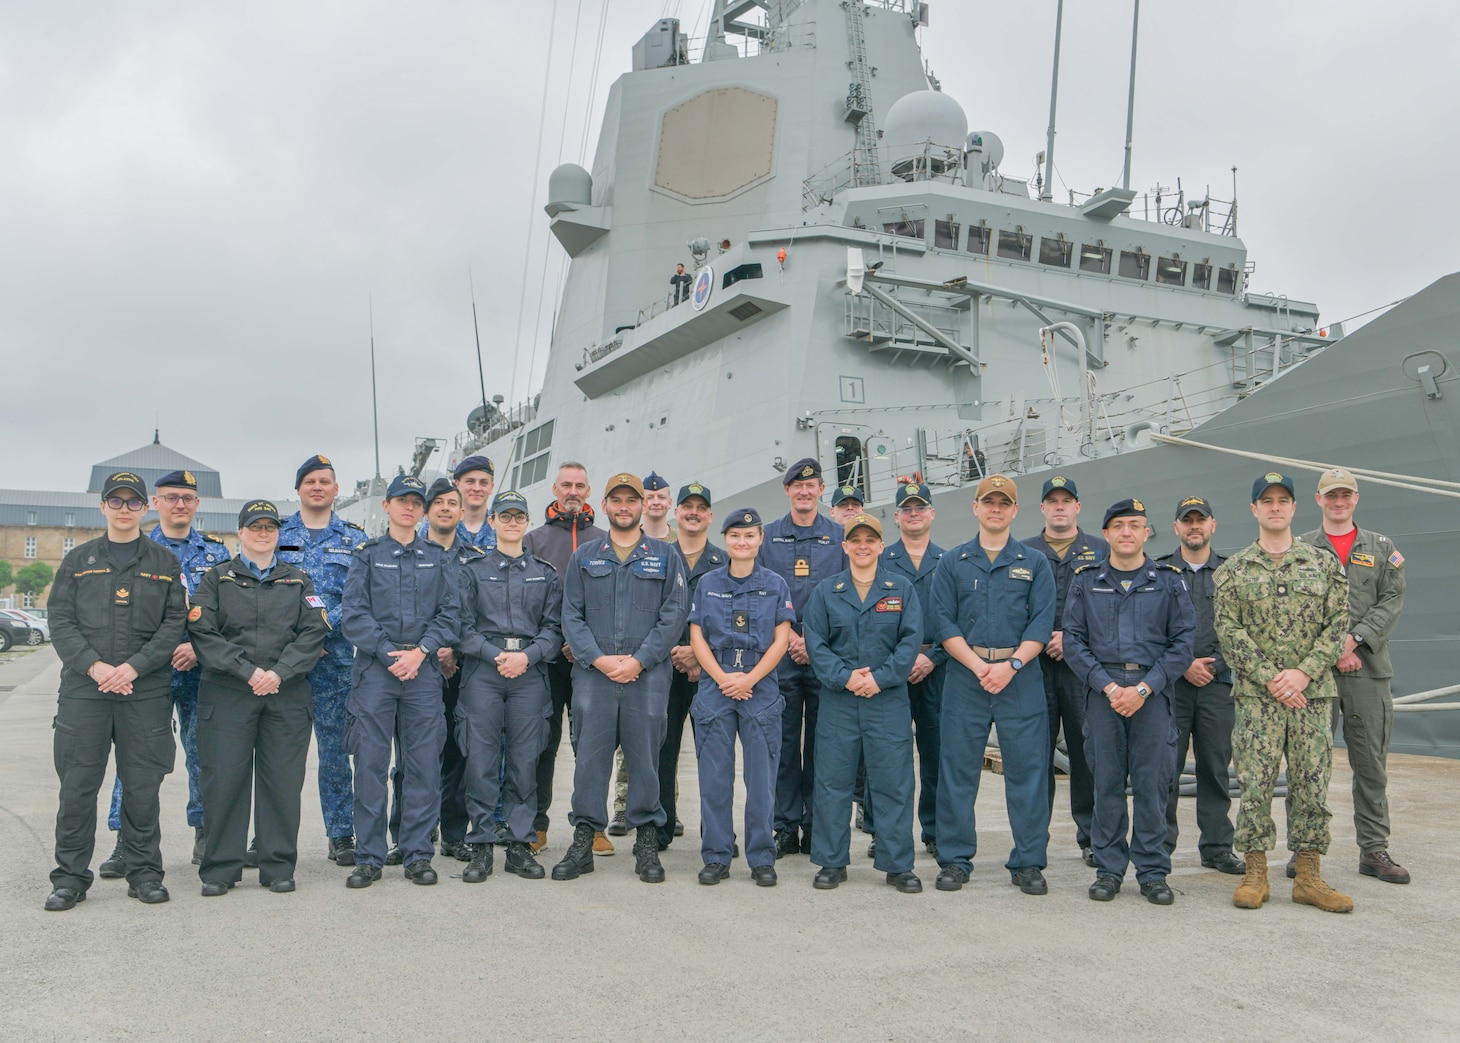 The multinational Commander, Task Group (CTG) Integrated Air and Missile Defense (IAMD) staff embarked aboard Spanish Navy Álvaro de Bazán-class frigate ESPS Blas de Lezo (F-103) in support of exercise Formidable Shield pose for a photo on the pier in Ferrol, Spain, April 28, 2023. Formidable Shield is a biennial exercise involving a series of live-fire events against subsonic, supersonic, and ballistic targets, incorporating multiple Allied ships, aircraft, and ground forces working across battlespaces to deliver effects.